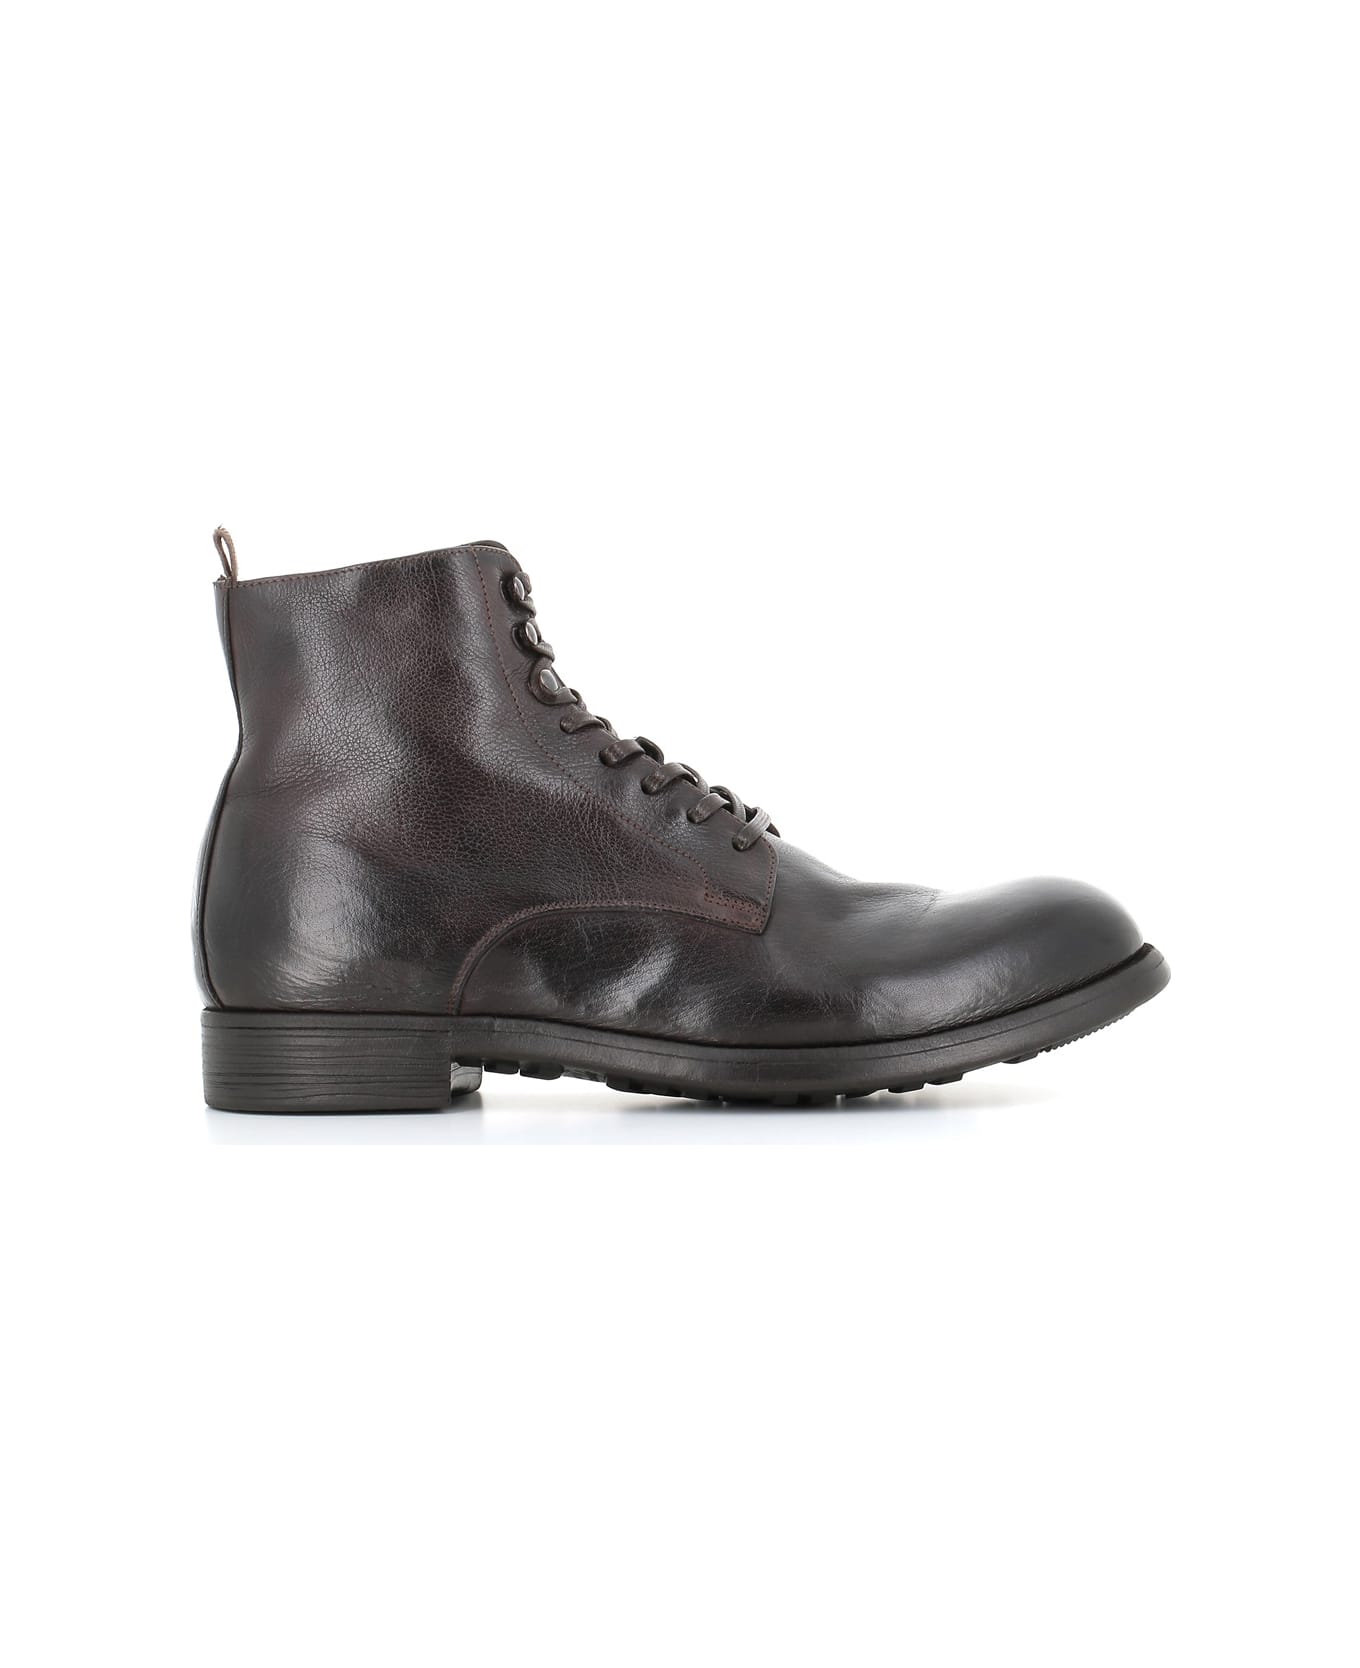 Officine Creative Lace-up Boot Chronicle/004 - Dark brown ブーツ